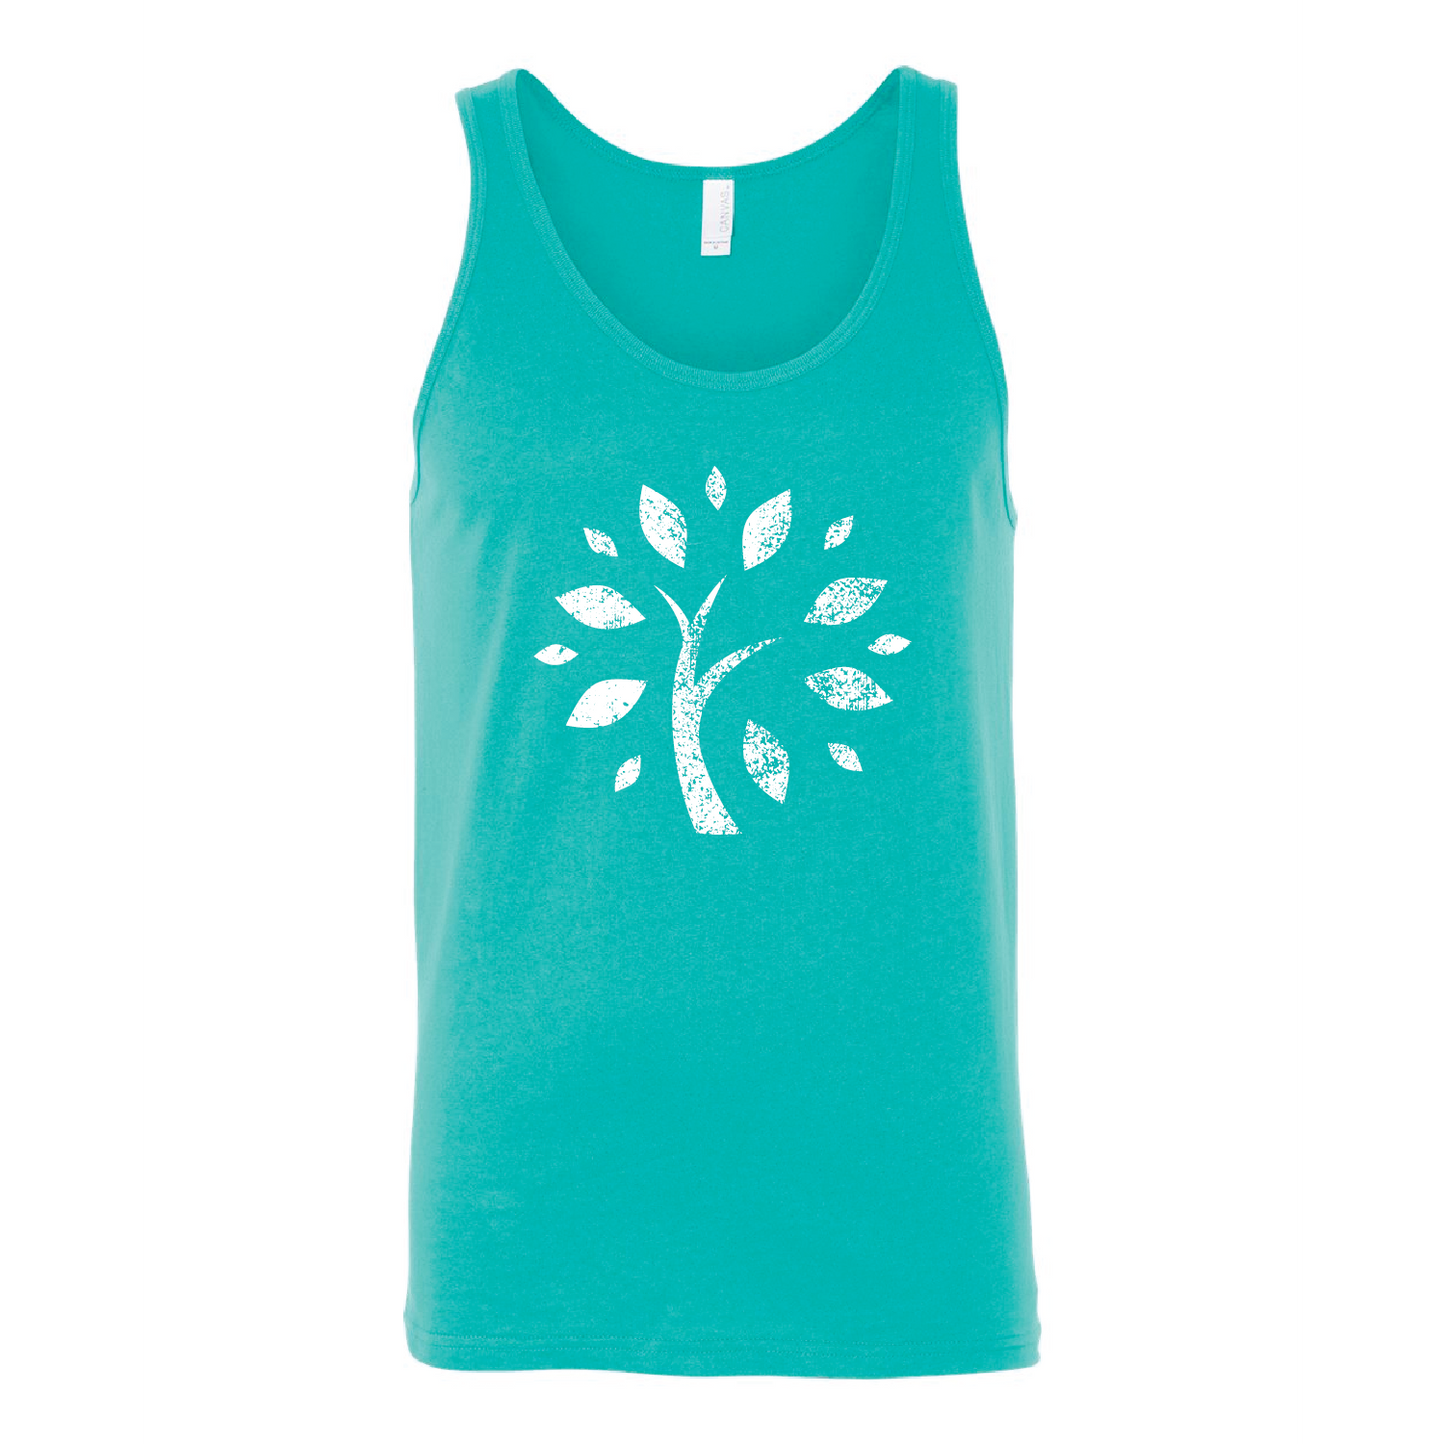 Reliable Unisex Jersey Tank